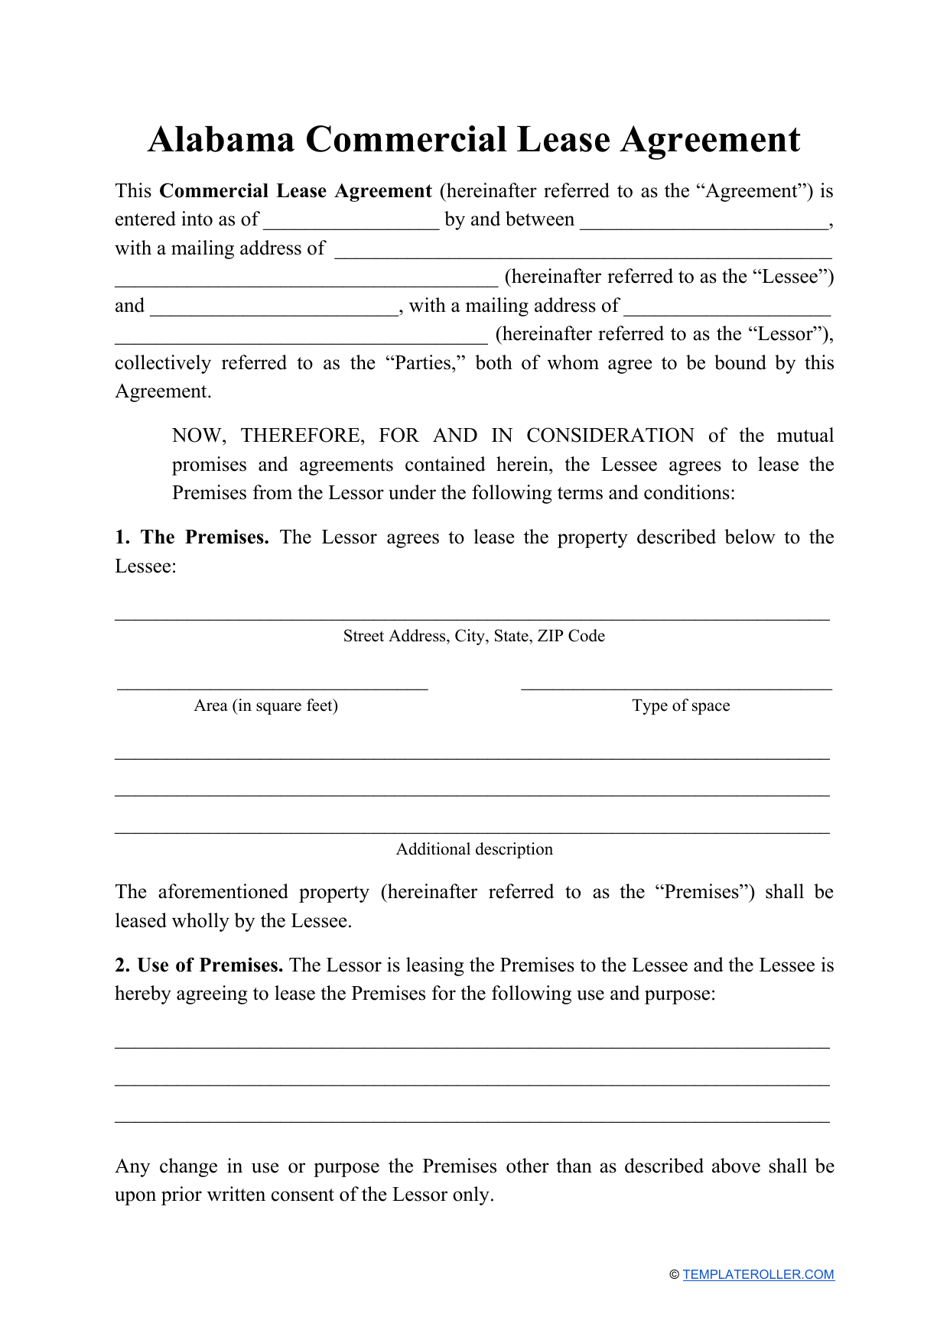 Commercial Lease Agreement Template - Alabama, Page 1